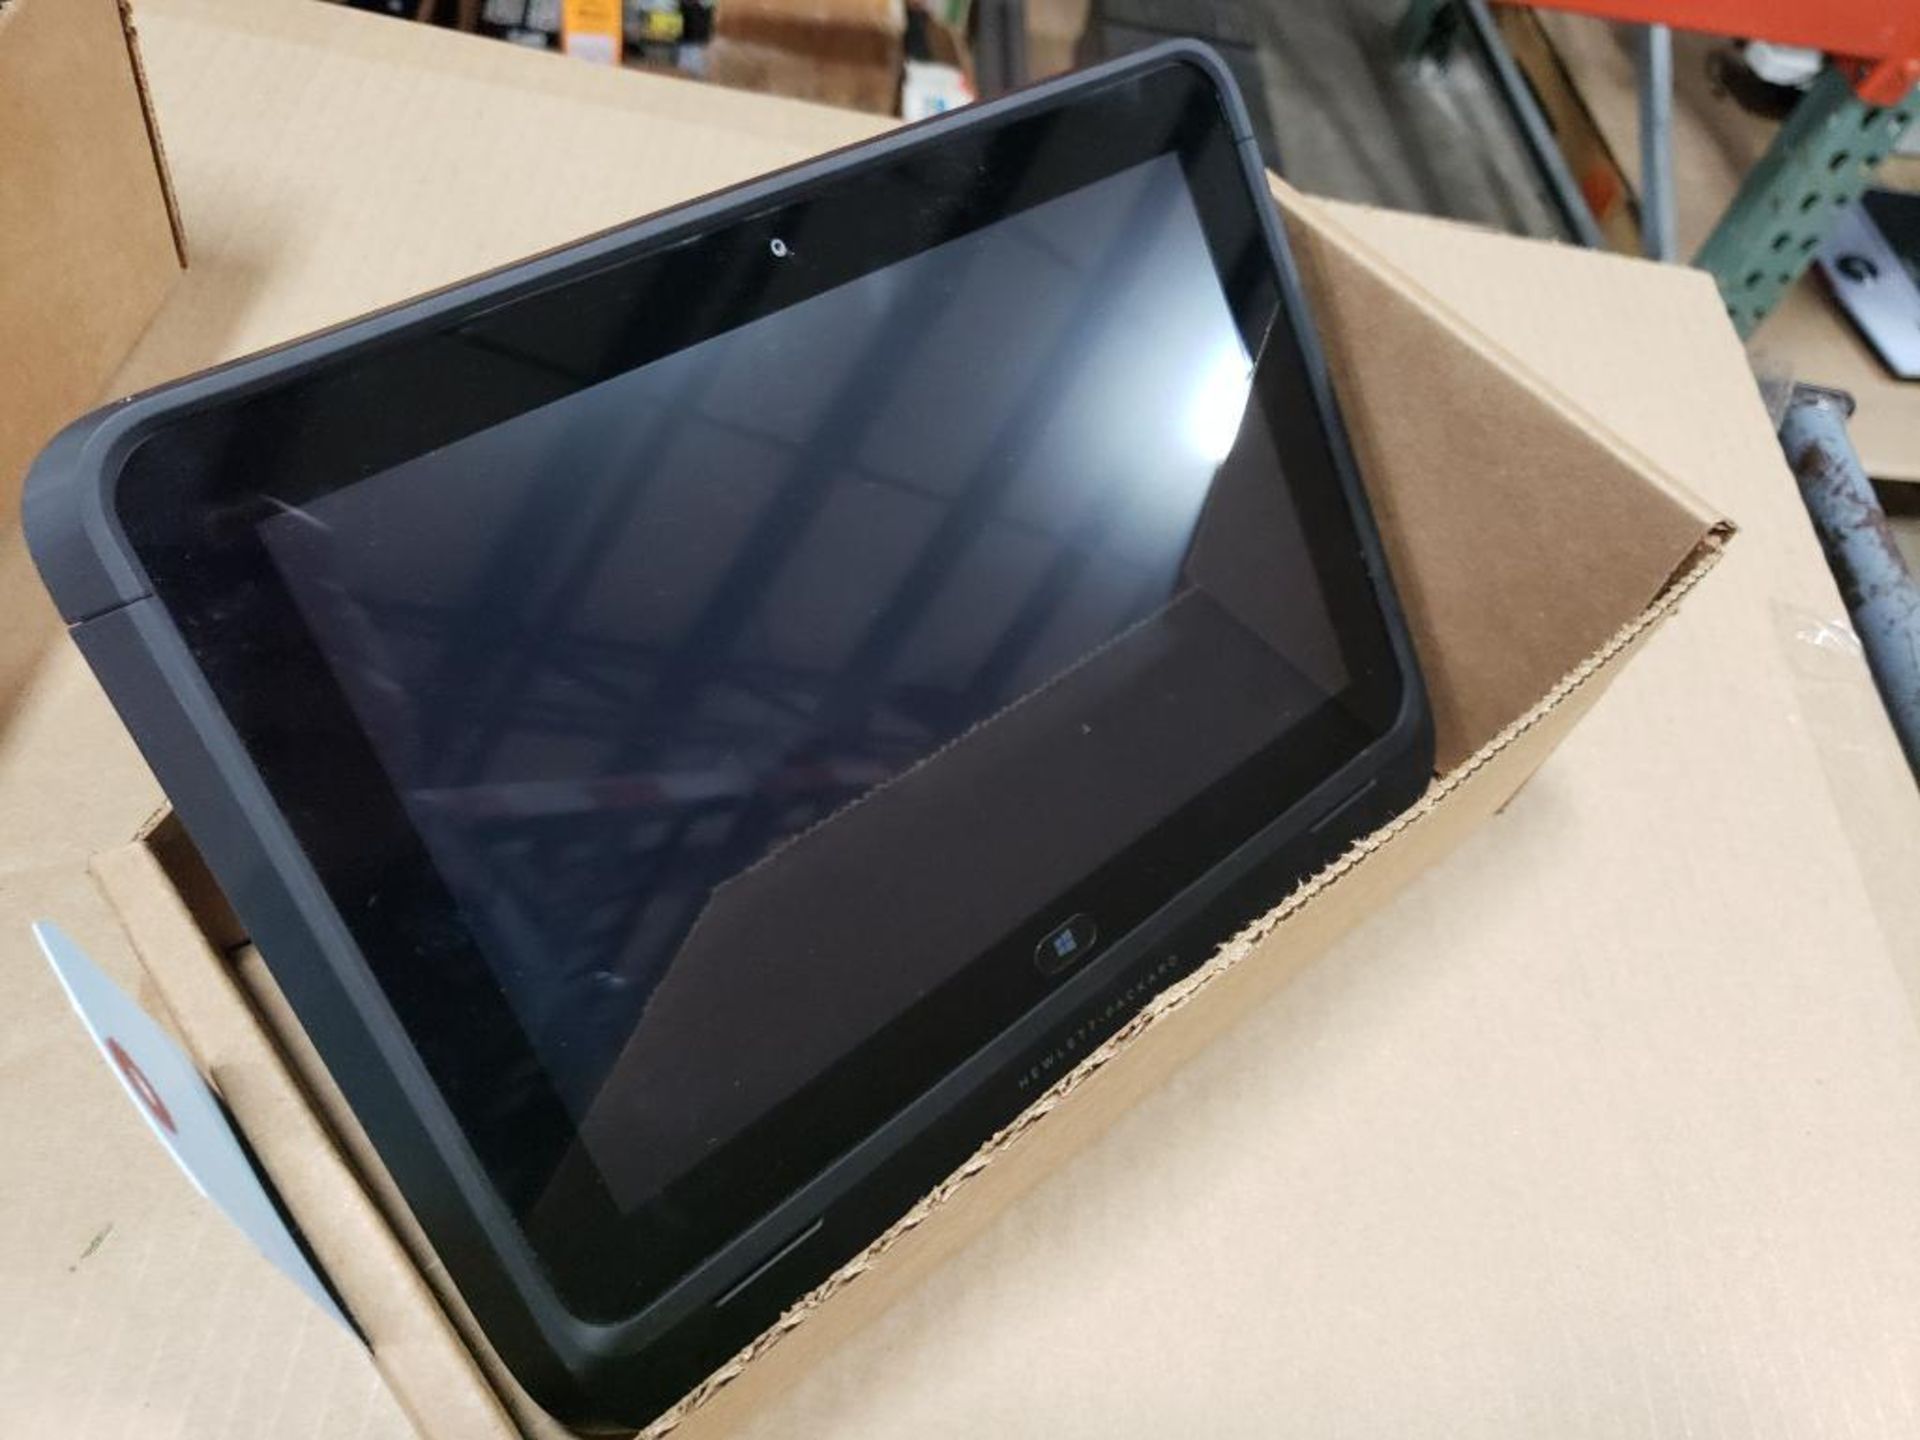 HP HSTNN-C75C Elite Pro 900 G1 10.1 tablet with case. - Image 6 of 6